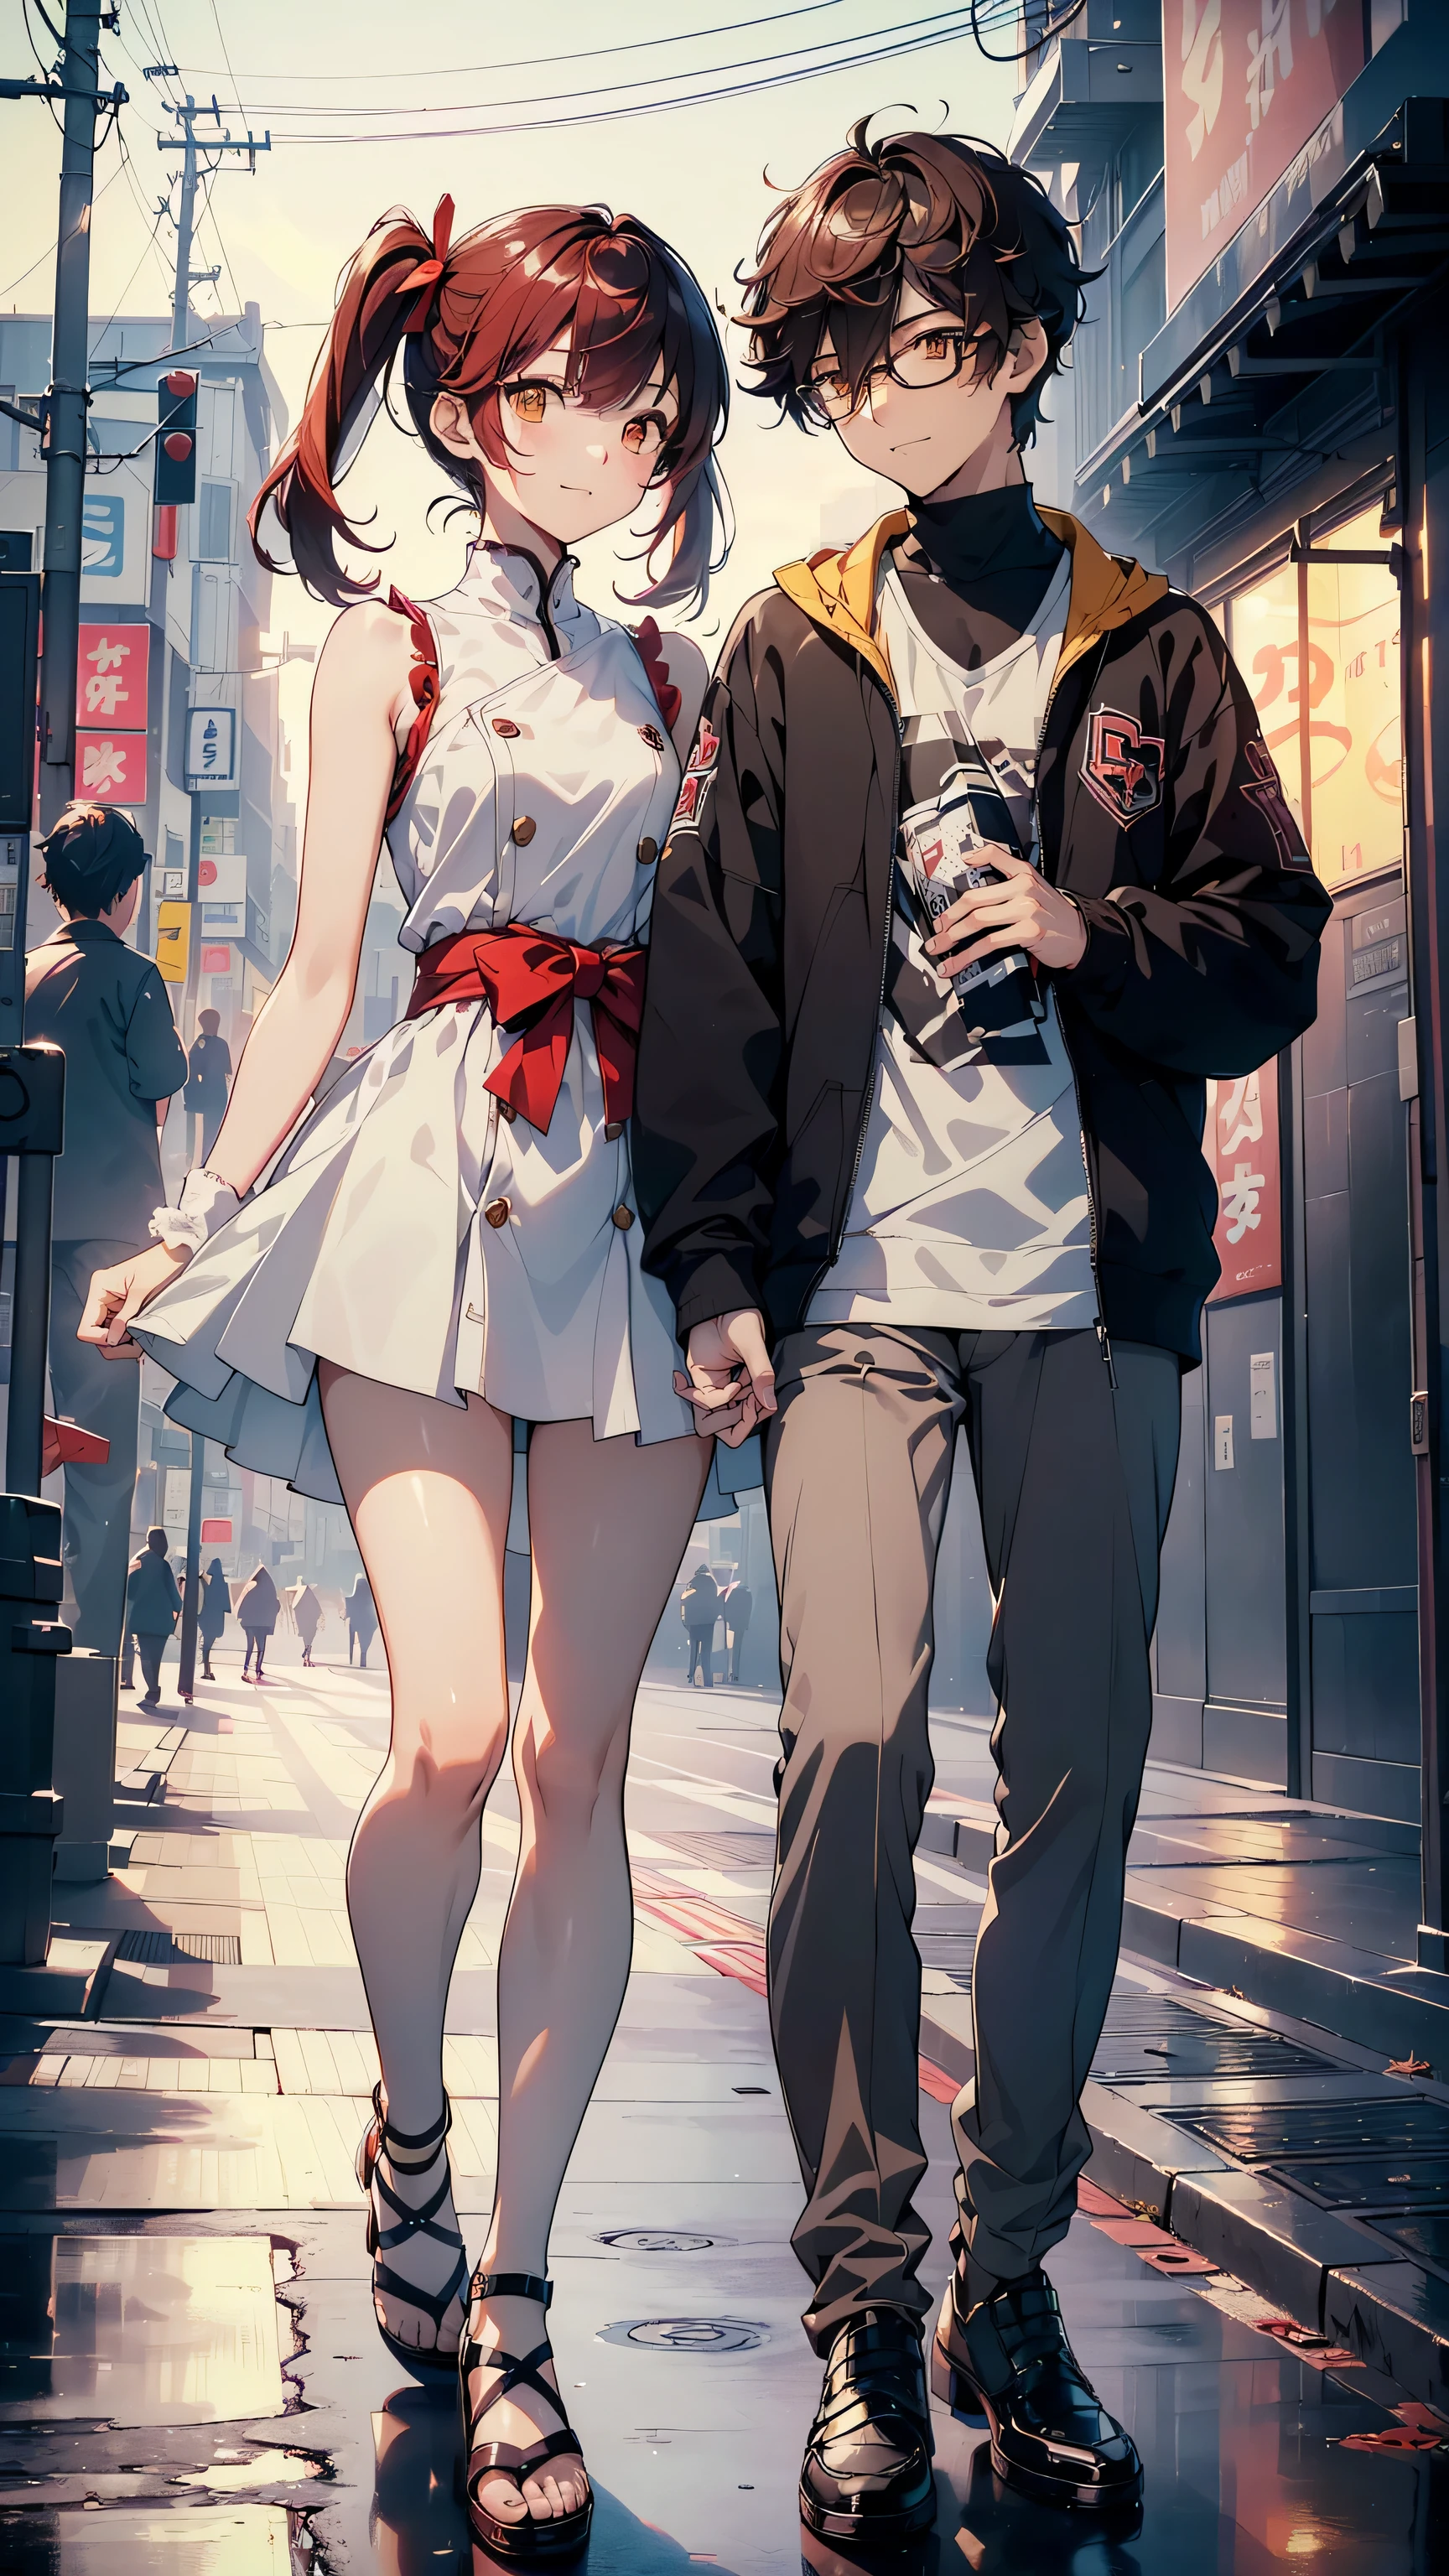 ((top quality, ultra detailed, high resolution, Extremely detailed CG, unity wallpaper 8k, by famous artist, Perfect anatomy, super detailed skin, cinematic lighting, HD, retina, Anatomically correct, 1080P)), ((Please draw a couple in love of one girl and one boy in a lovely date:1.3), ((a girl with a boy)), ((Girl details: face,12-year-old:3.0, Child, body  shape, skinny, immature, moe, kawaii, Beautiful, bidding, A high school student, Androgynous Amulet, medium hair, girl with completely red hair, redhead, Collections, straight bangs, with a little bow in her hair, Complete ends, full fingers, perfect fingers, flat chest, body , Small rear, ingle, Beautiful detailed yellow gold filled eyes., Perfect eyes, japanese kawaii dress with pastel colors and Beautiful designs, coquette, bare arms and shoulders, sleeveless, thin legs, Small height, bidding face, Girl without glasses, full body view, standing, legs, body of a 12 year old girl)) ((Details of the : face, 17-year-old:2.0, amamiya-ren, athletic, manly, masculine, elegant, A high school student, boy with dark brown hair, Complete ends, full fingers, perfect fingers, perfect arms, masculine, manly, Small rear, Beautiful dark brown eyes full of details,  with glasses, Perfect eyes, ropa juvenil elegant hombre, the boy is more mature, mature boy)) (detailed lighting), (detailed background), ((romantic date at night walking through the streets of Tokyo)), Full body shot, ((perfect every 5 fingers)) ((A Man and a Woman)) ((Girl with red hair)) ((boy with dark brown hair)) ((romantic)) ((in love)) ((happy face)) ((smiling))